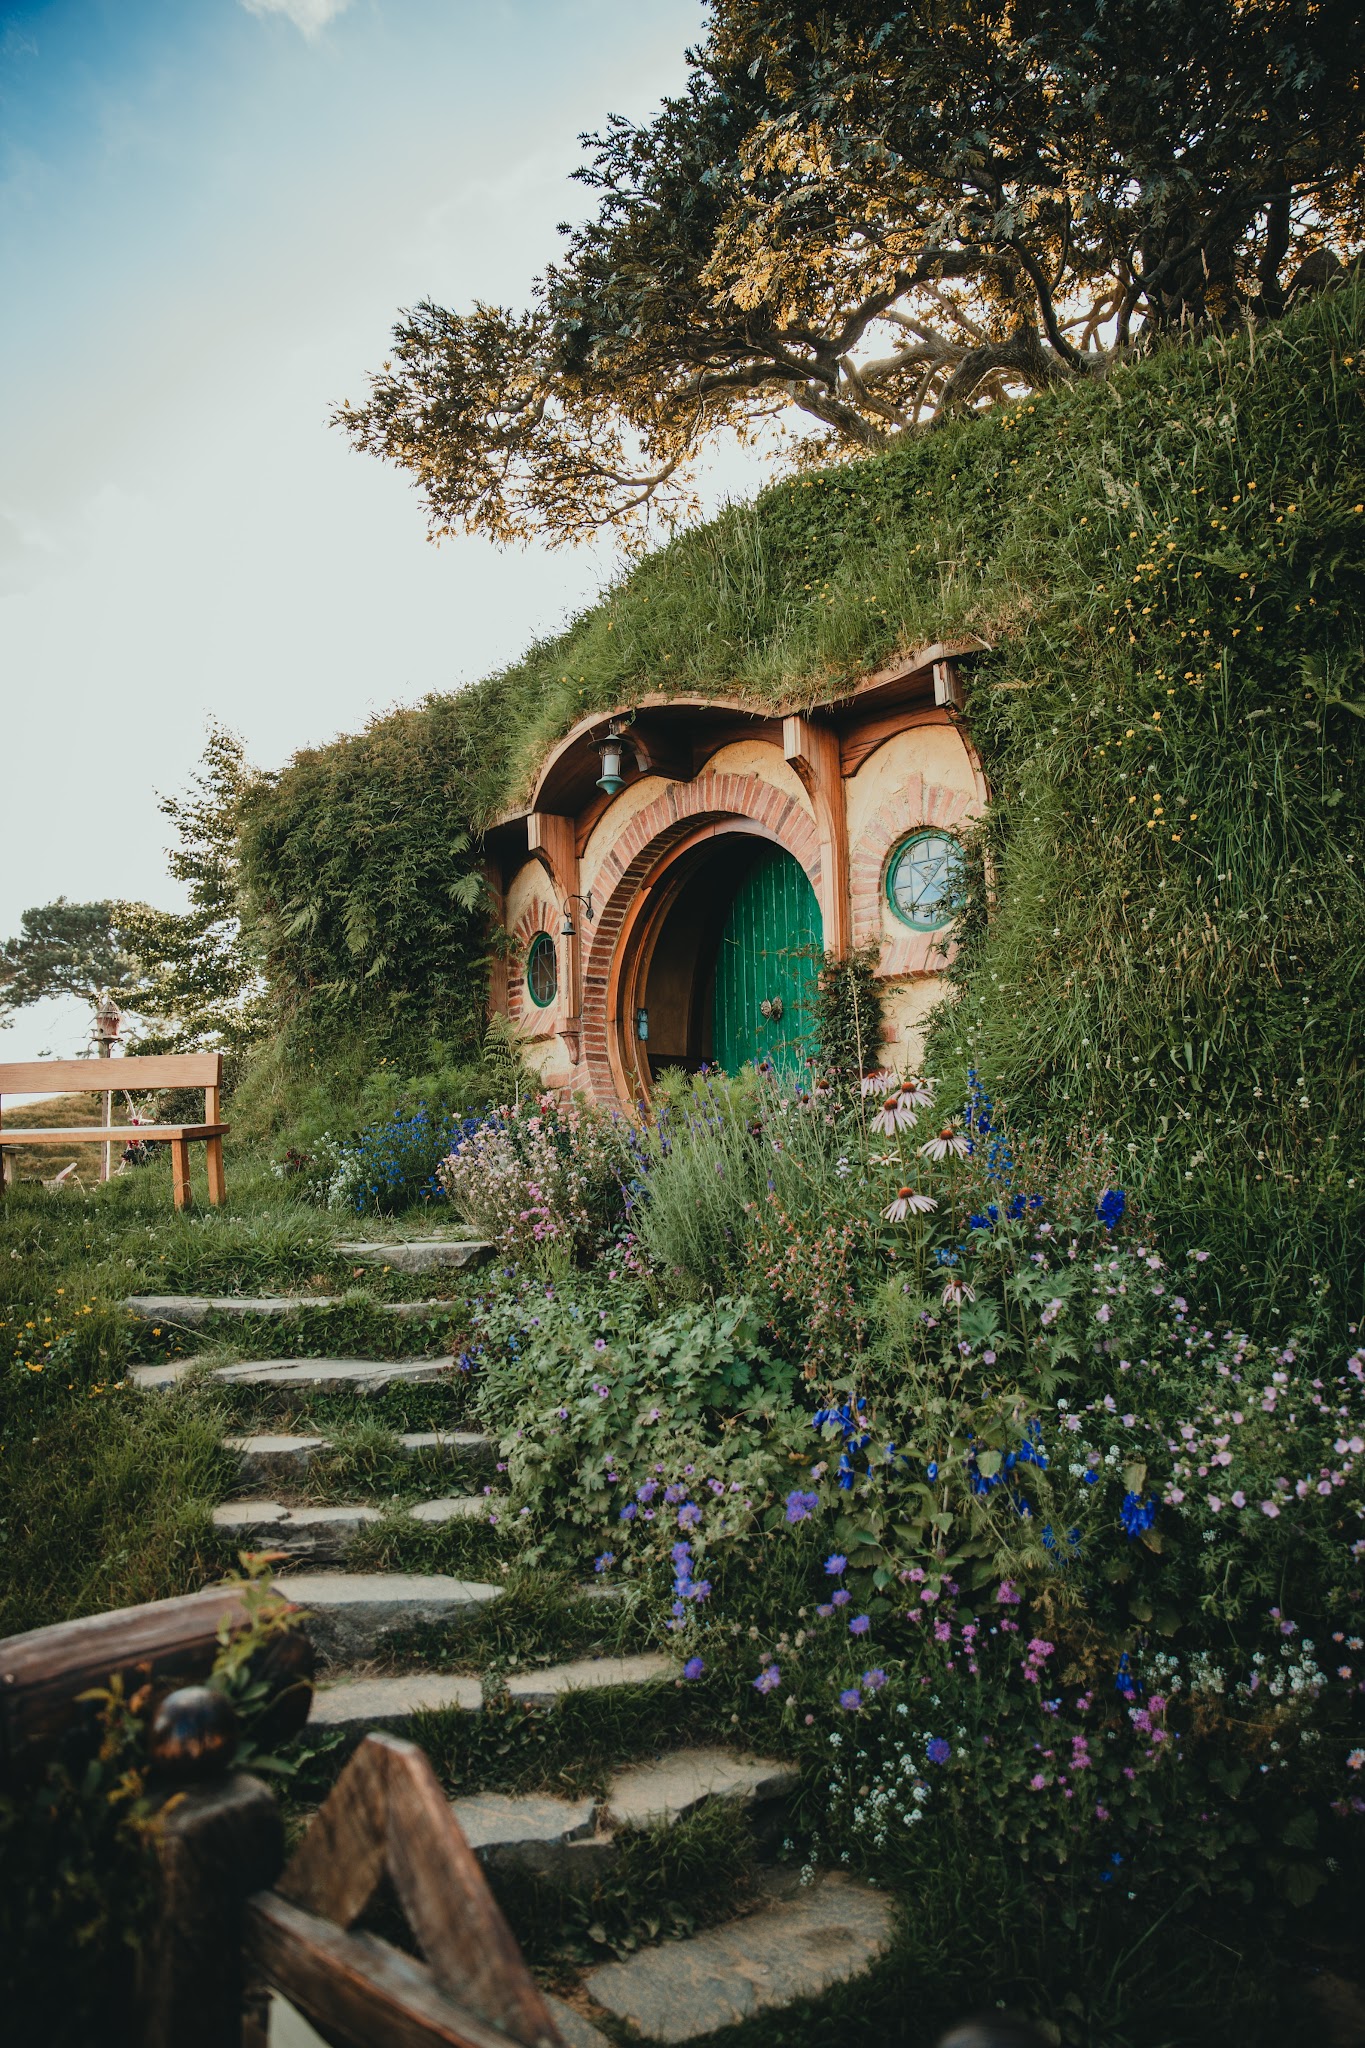 10 countries to solo travel to - Hobbiton, New Zealand